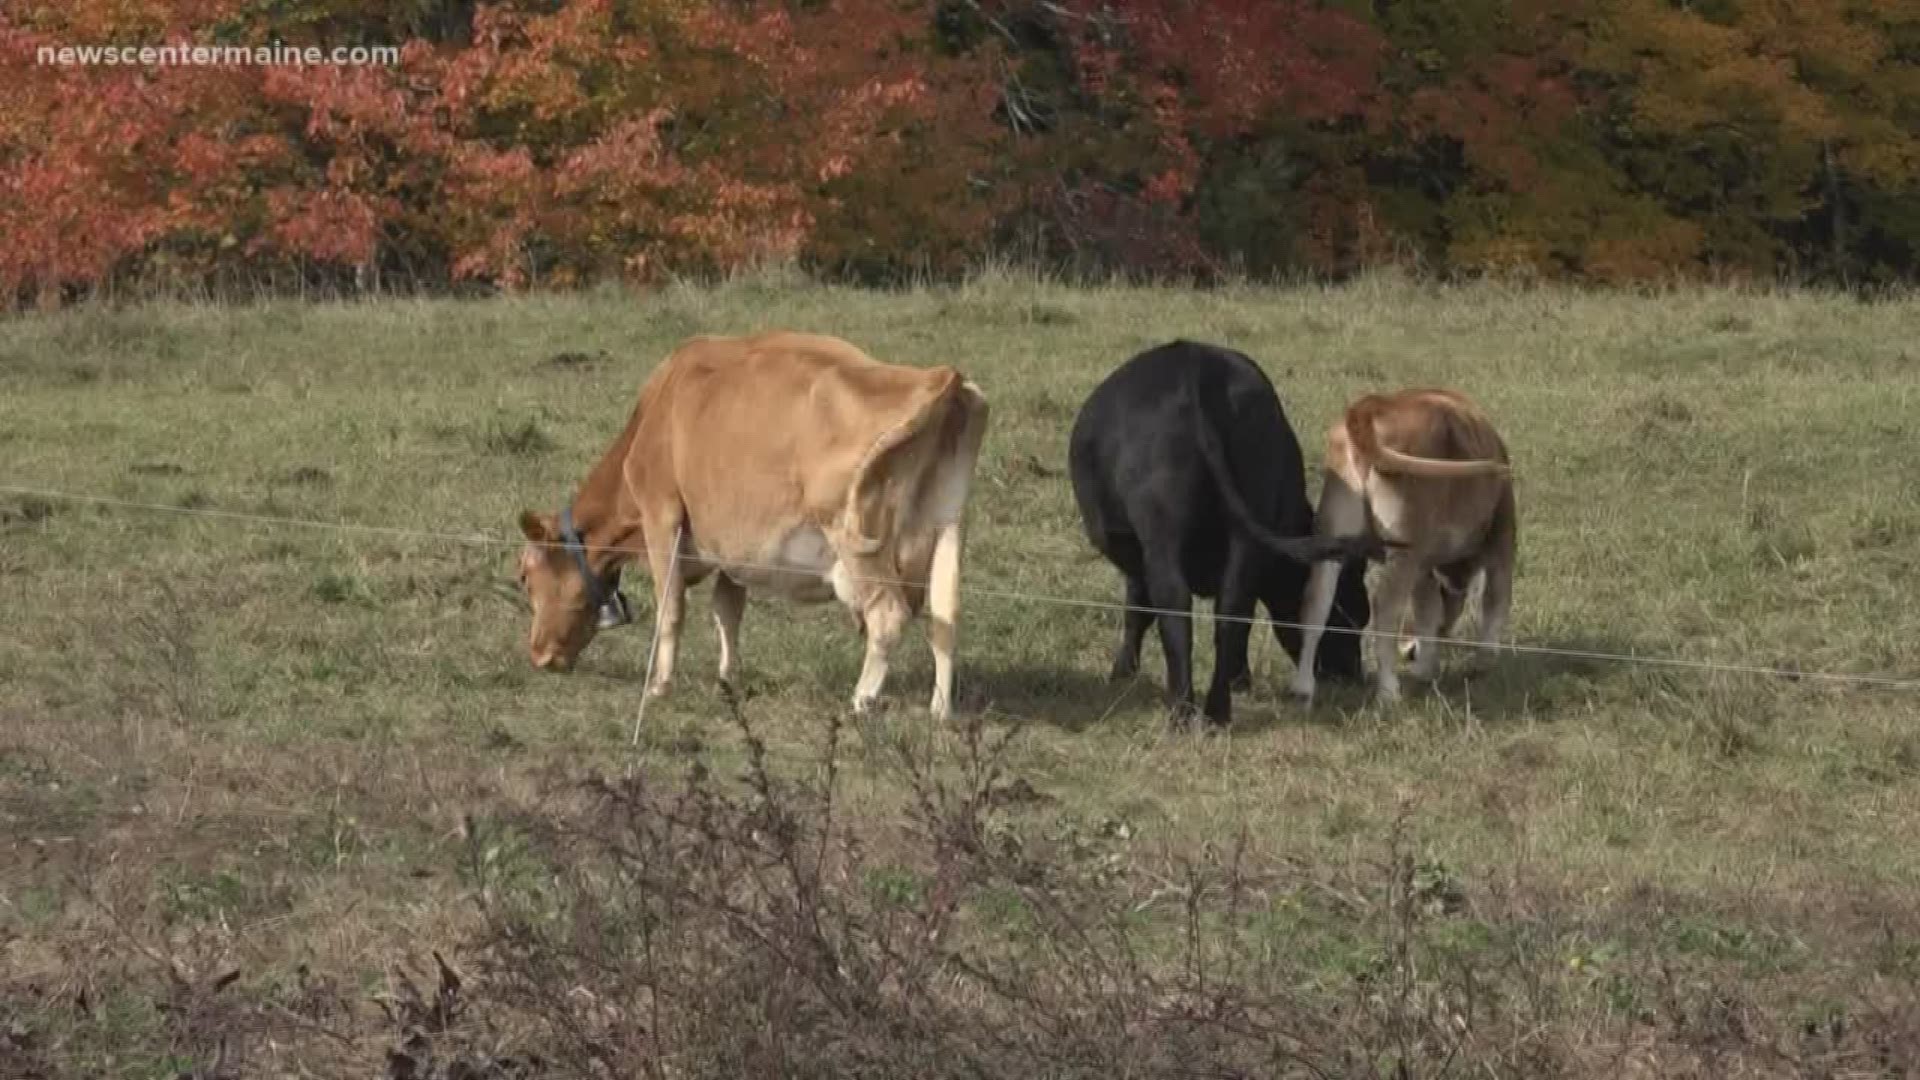 Maine credit union offering help to farmers